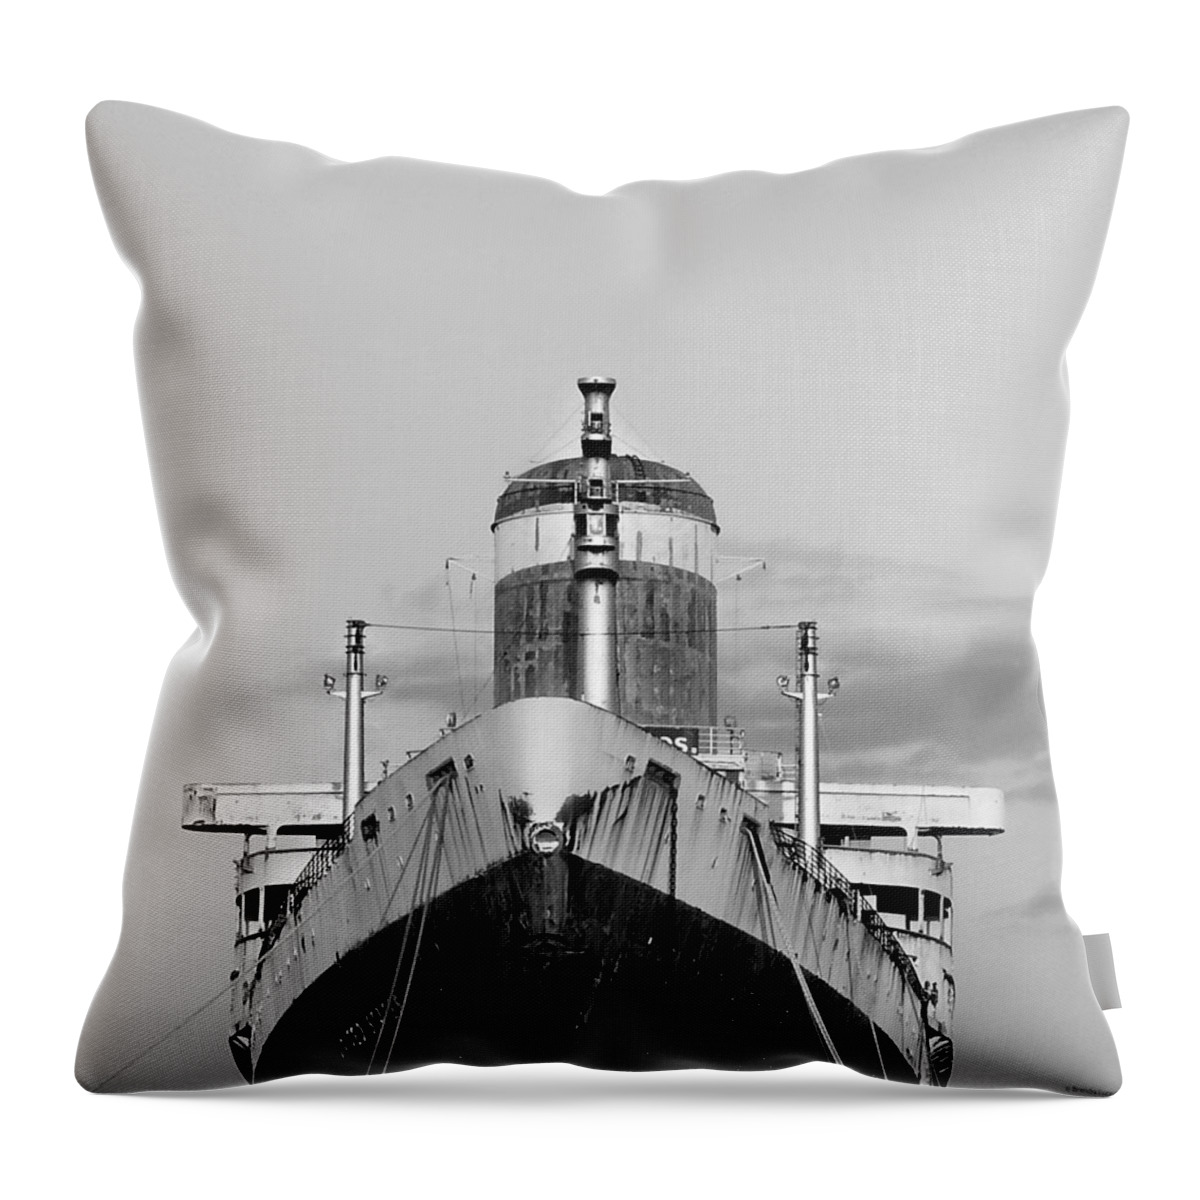 Ssus Throw Pillow featuring the photograph Ssus by Dark Whimsy